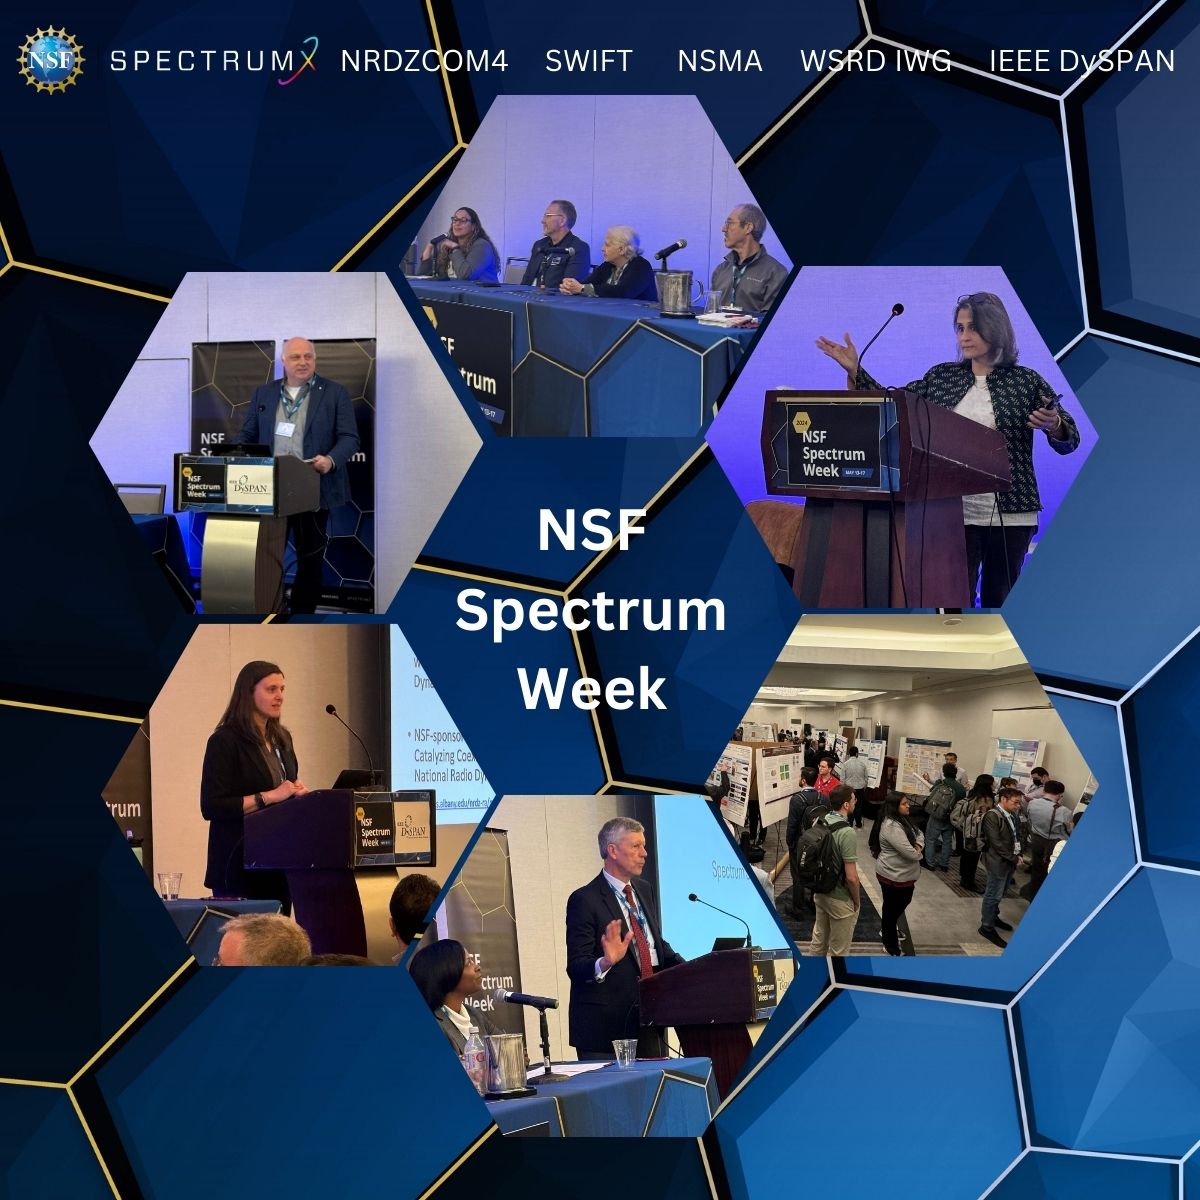 🚀Day 3 of @NSF Spectrum Week in Arlington, Virginia, has launched! We have had important interdisciplinary, cross-cutting discussions & presentations throughout the week with IEEE DySPAN, NSMA, SpectrumX, & SWIFT. We look forward to a great 3rd day! 🔗: spectrumweek.org